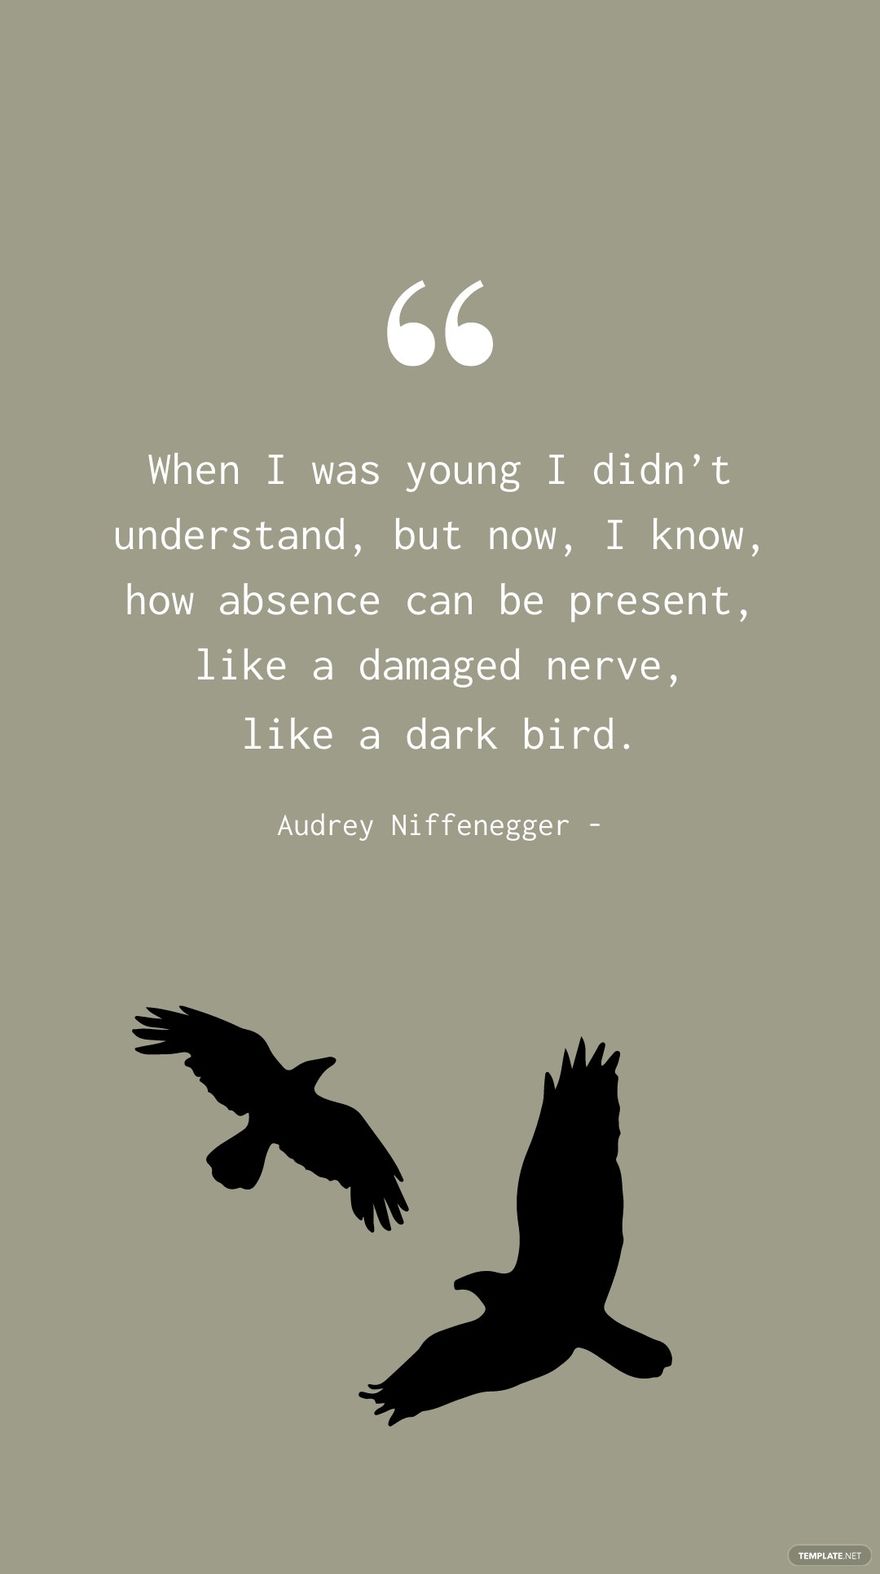 Free Audrey Niffenegger - When I was young I didn’t understand, but now, I know, how absence can be present, like a damaged nerve, like a dark bird. in JPG